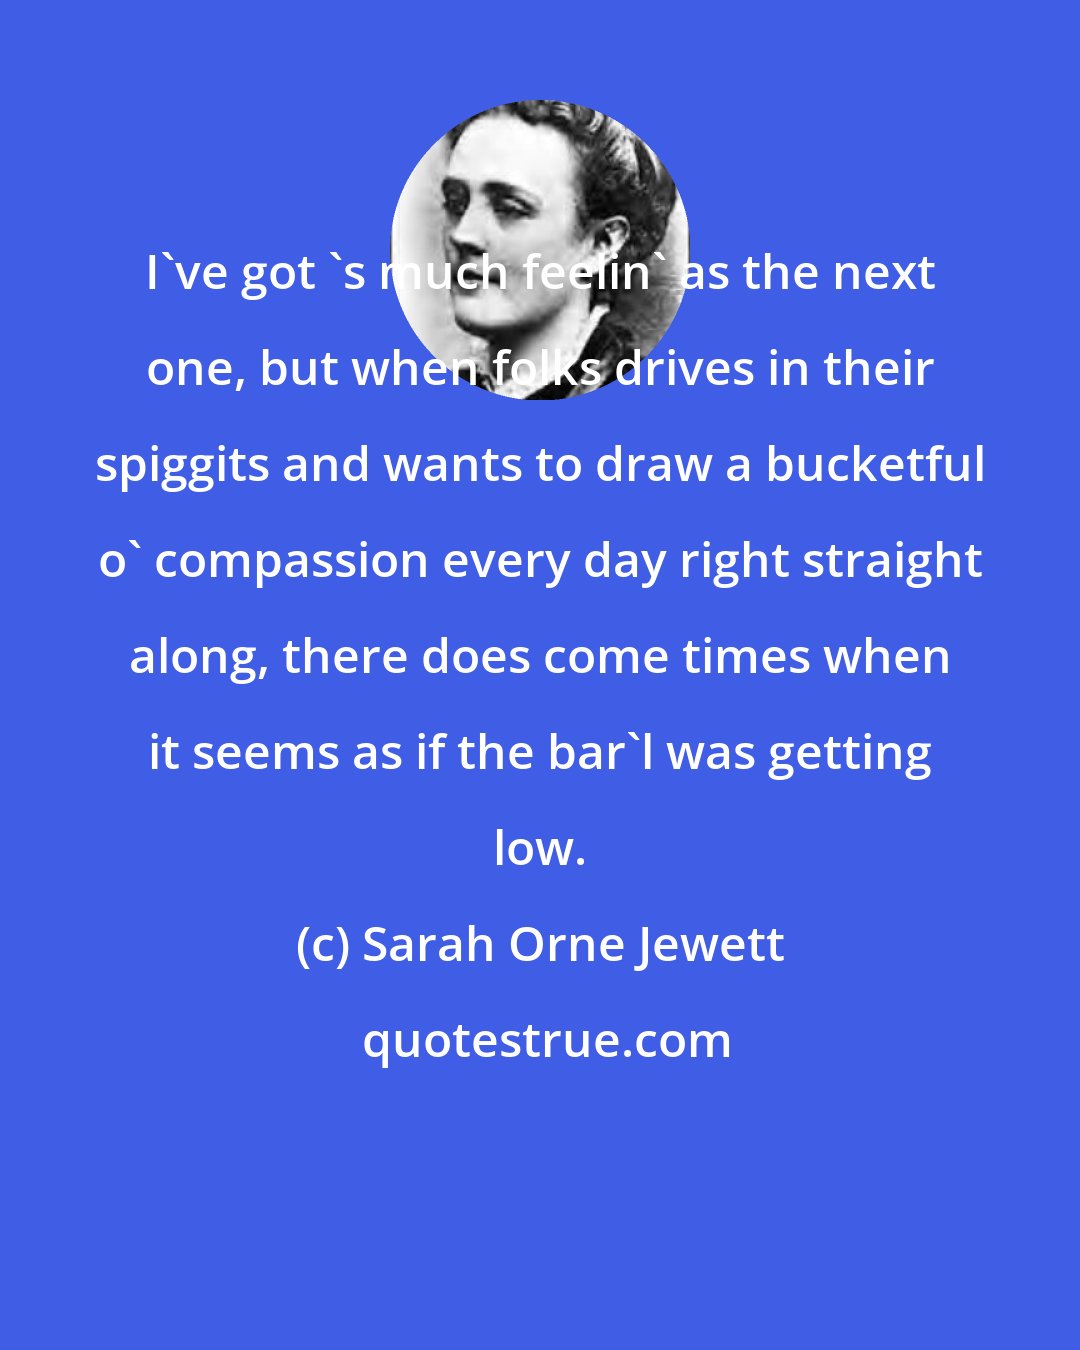 Sarah Orne Jewett: I've got 's much feelin' as the next one, but when folks drives in their spiggits and wants to draw a bucketful o' compassion every day right straight along, there does come times when it seems as if the bar'l was getting low.